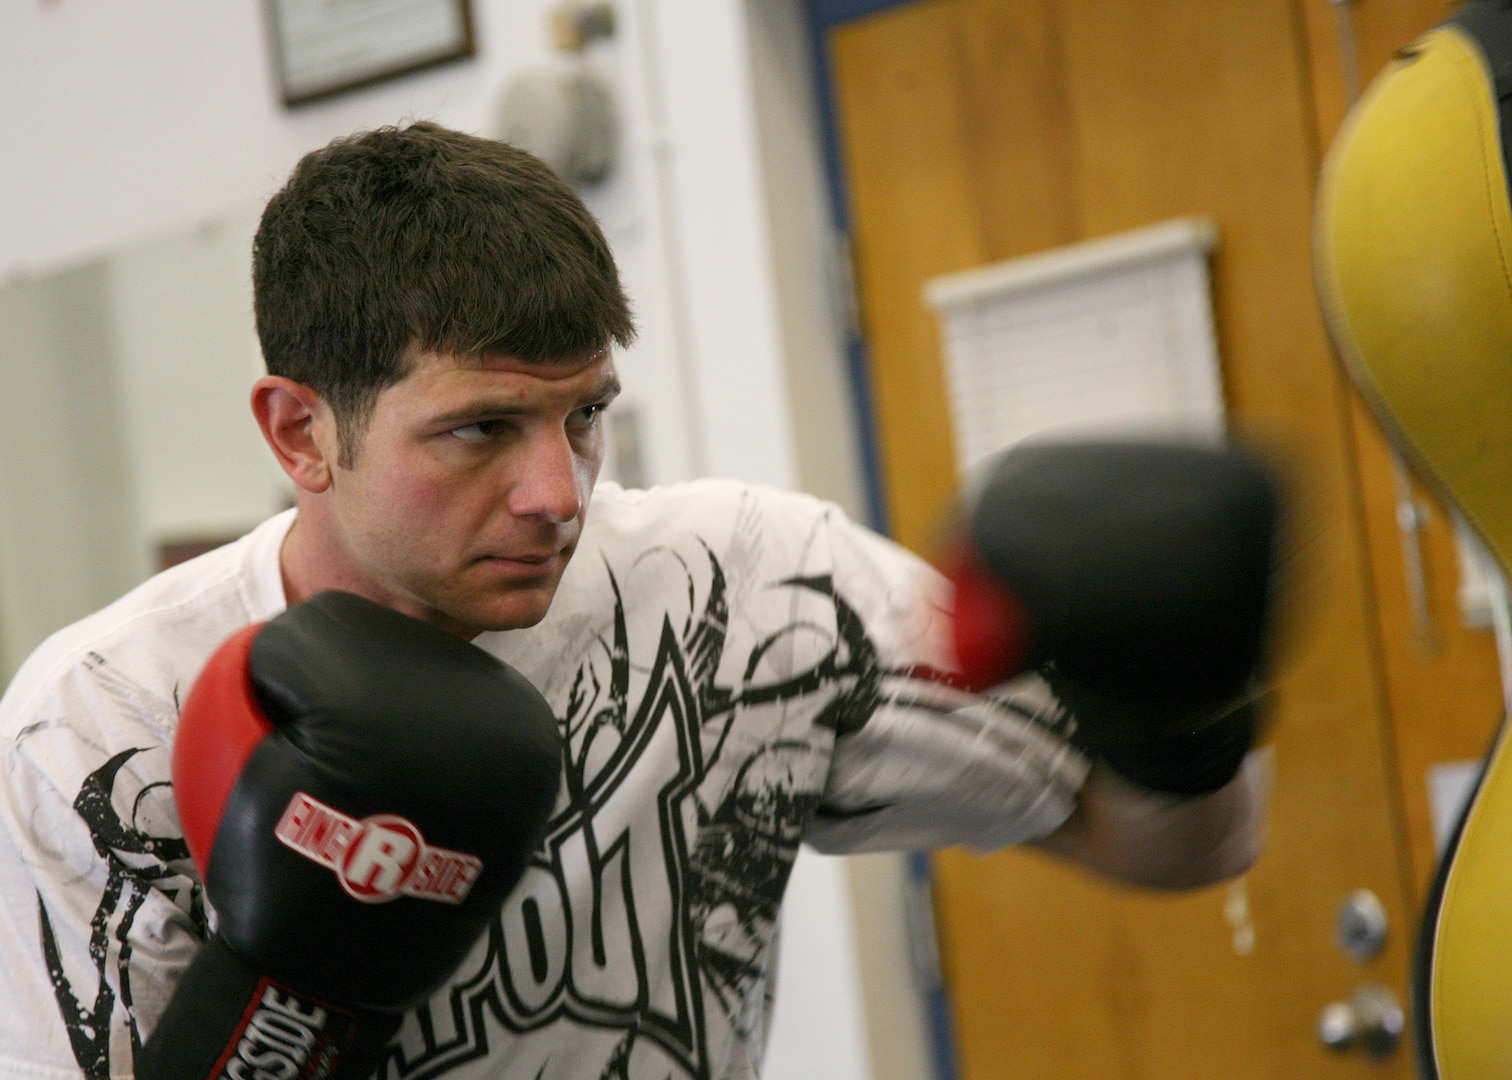 4/25/2009 - Air Force light heavyweight Nicholas Alwan, Pope AFB, N.C., trains prior to the Armed Forces Championship. He earned a silver medal at the interservice event May 1. (U.S. Air Force photo/Robbin Cresswell)